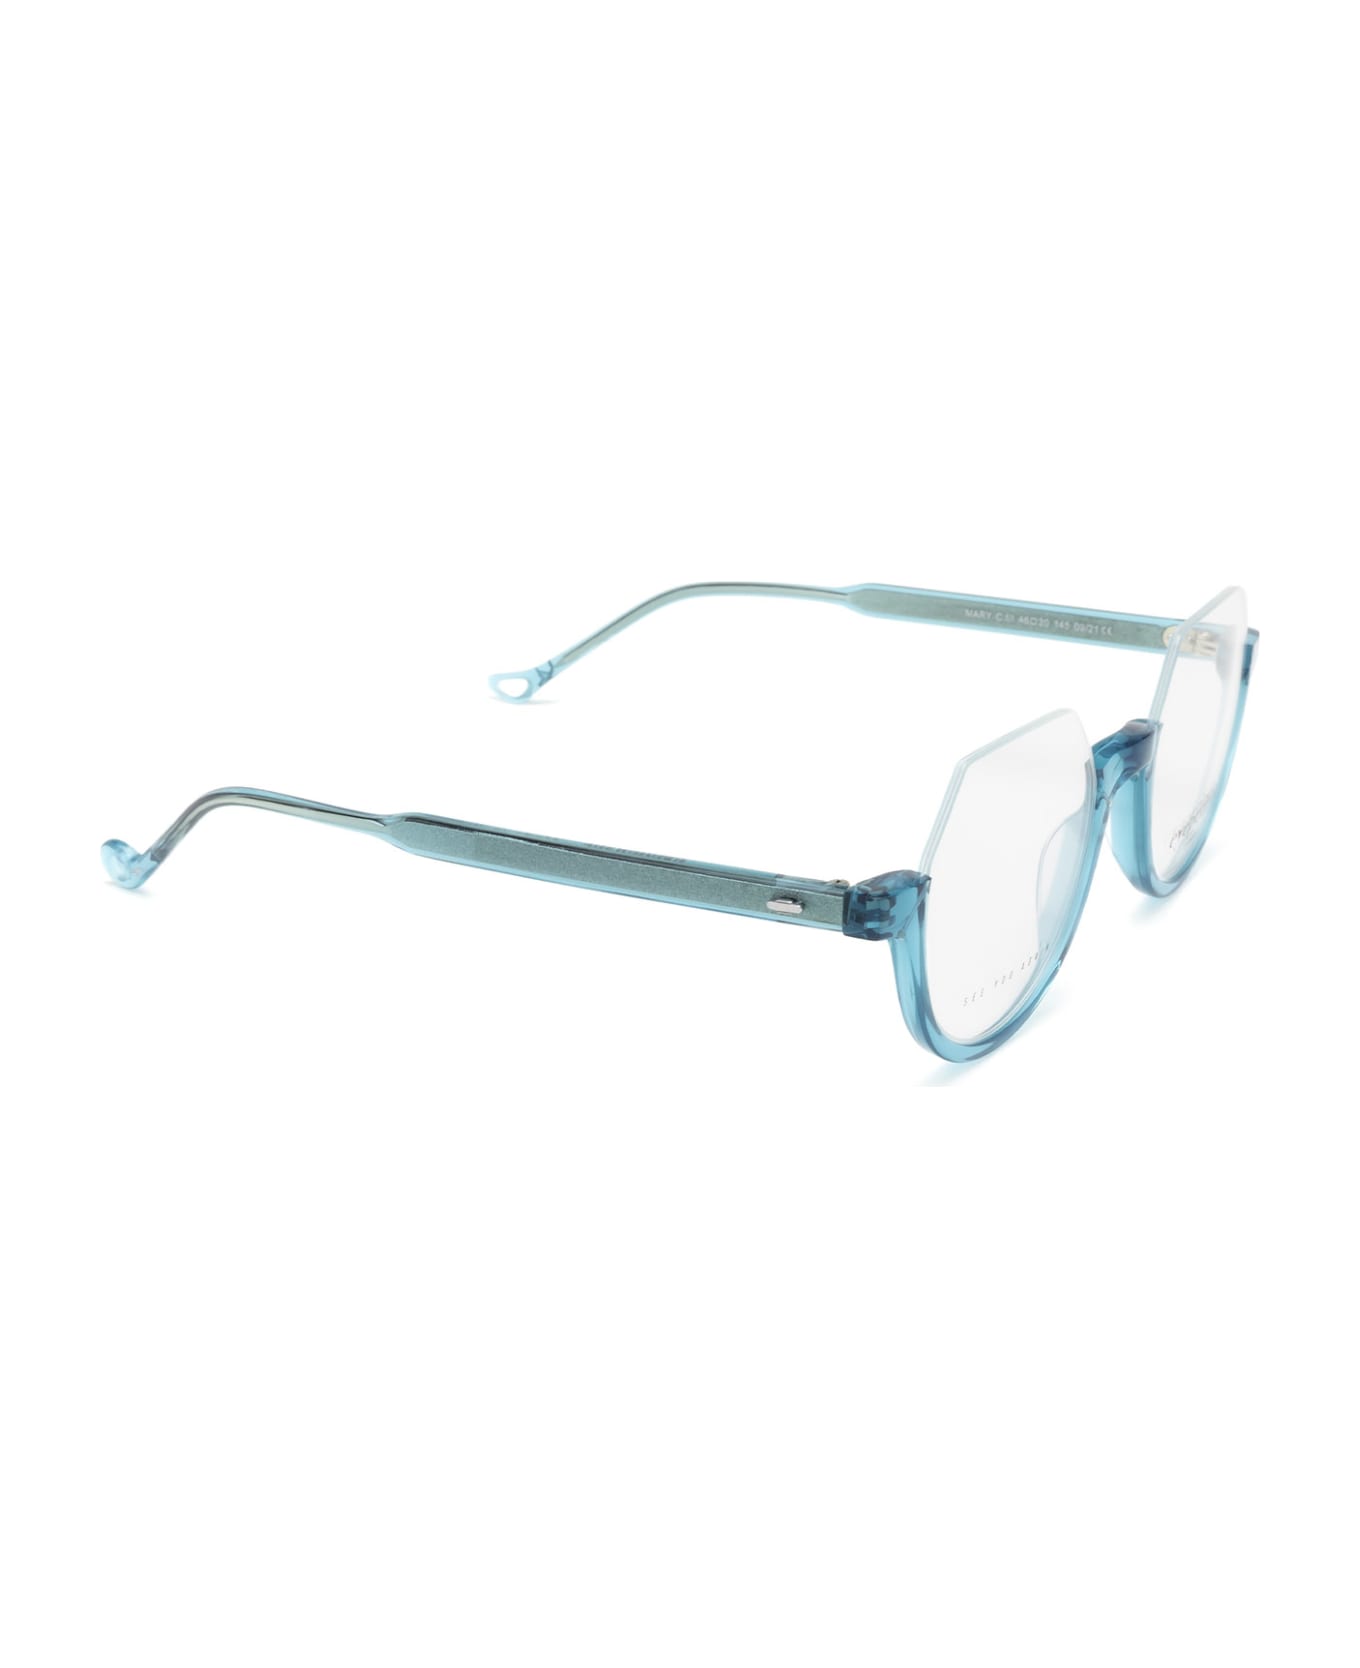 Eyepetizer Mary Teal Blue Glasses - Teal Blue アイウェア